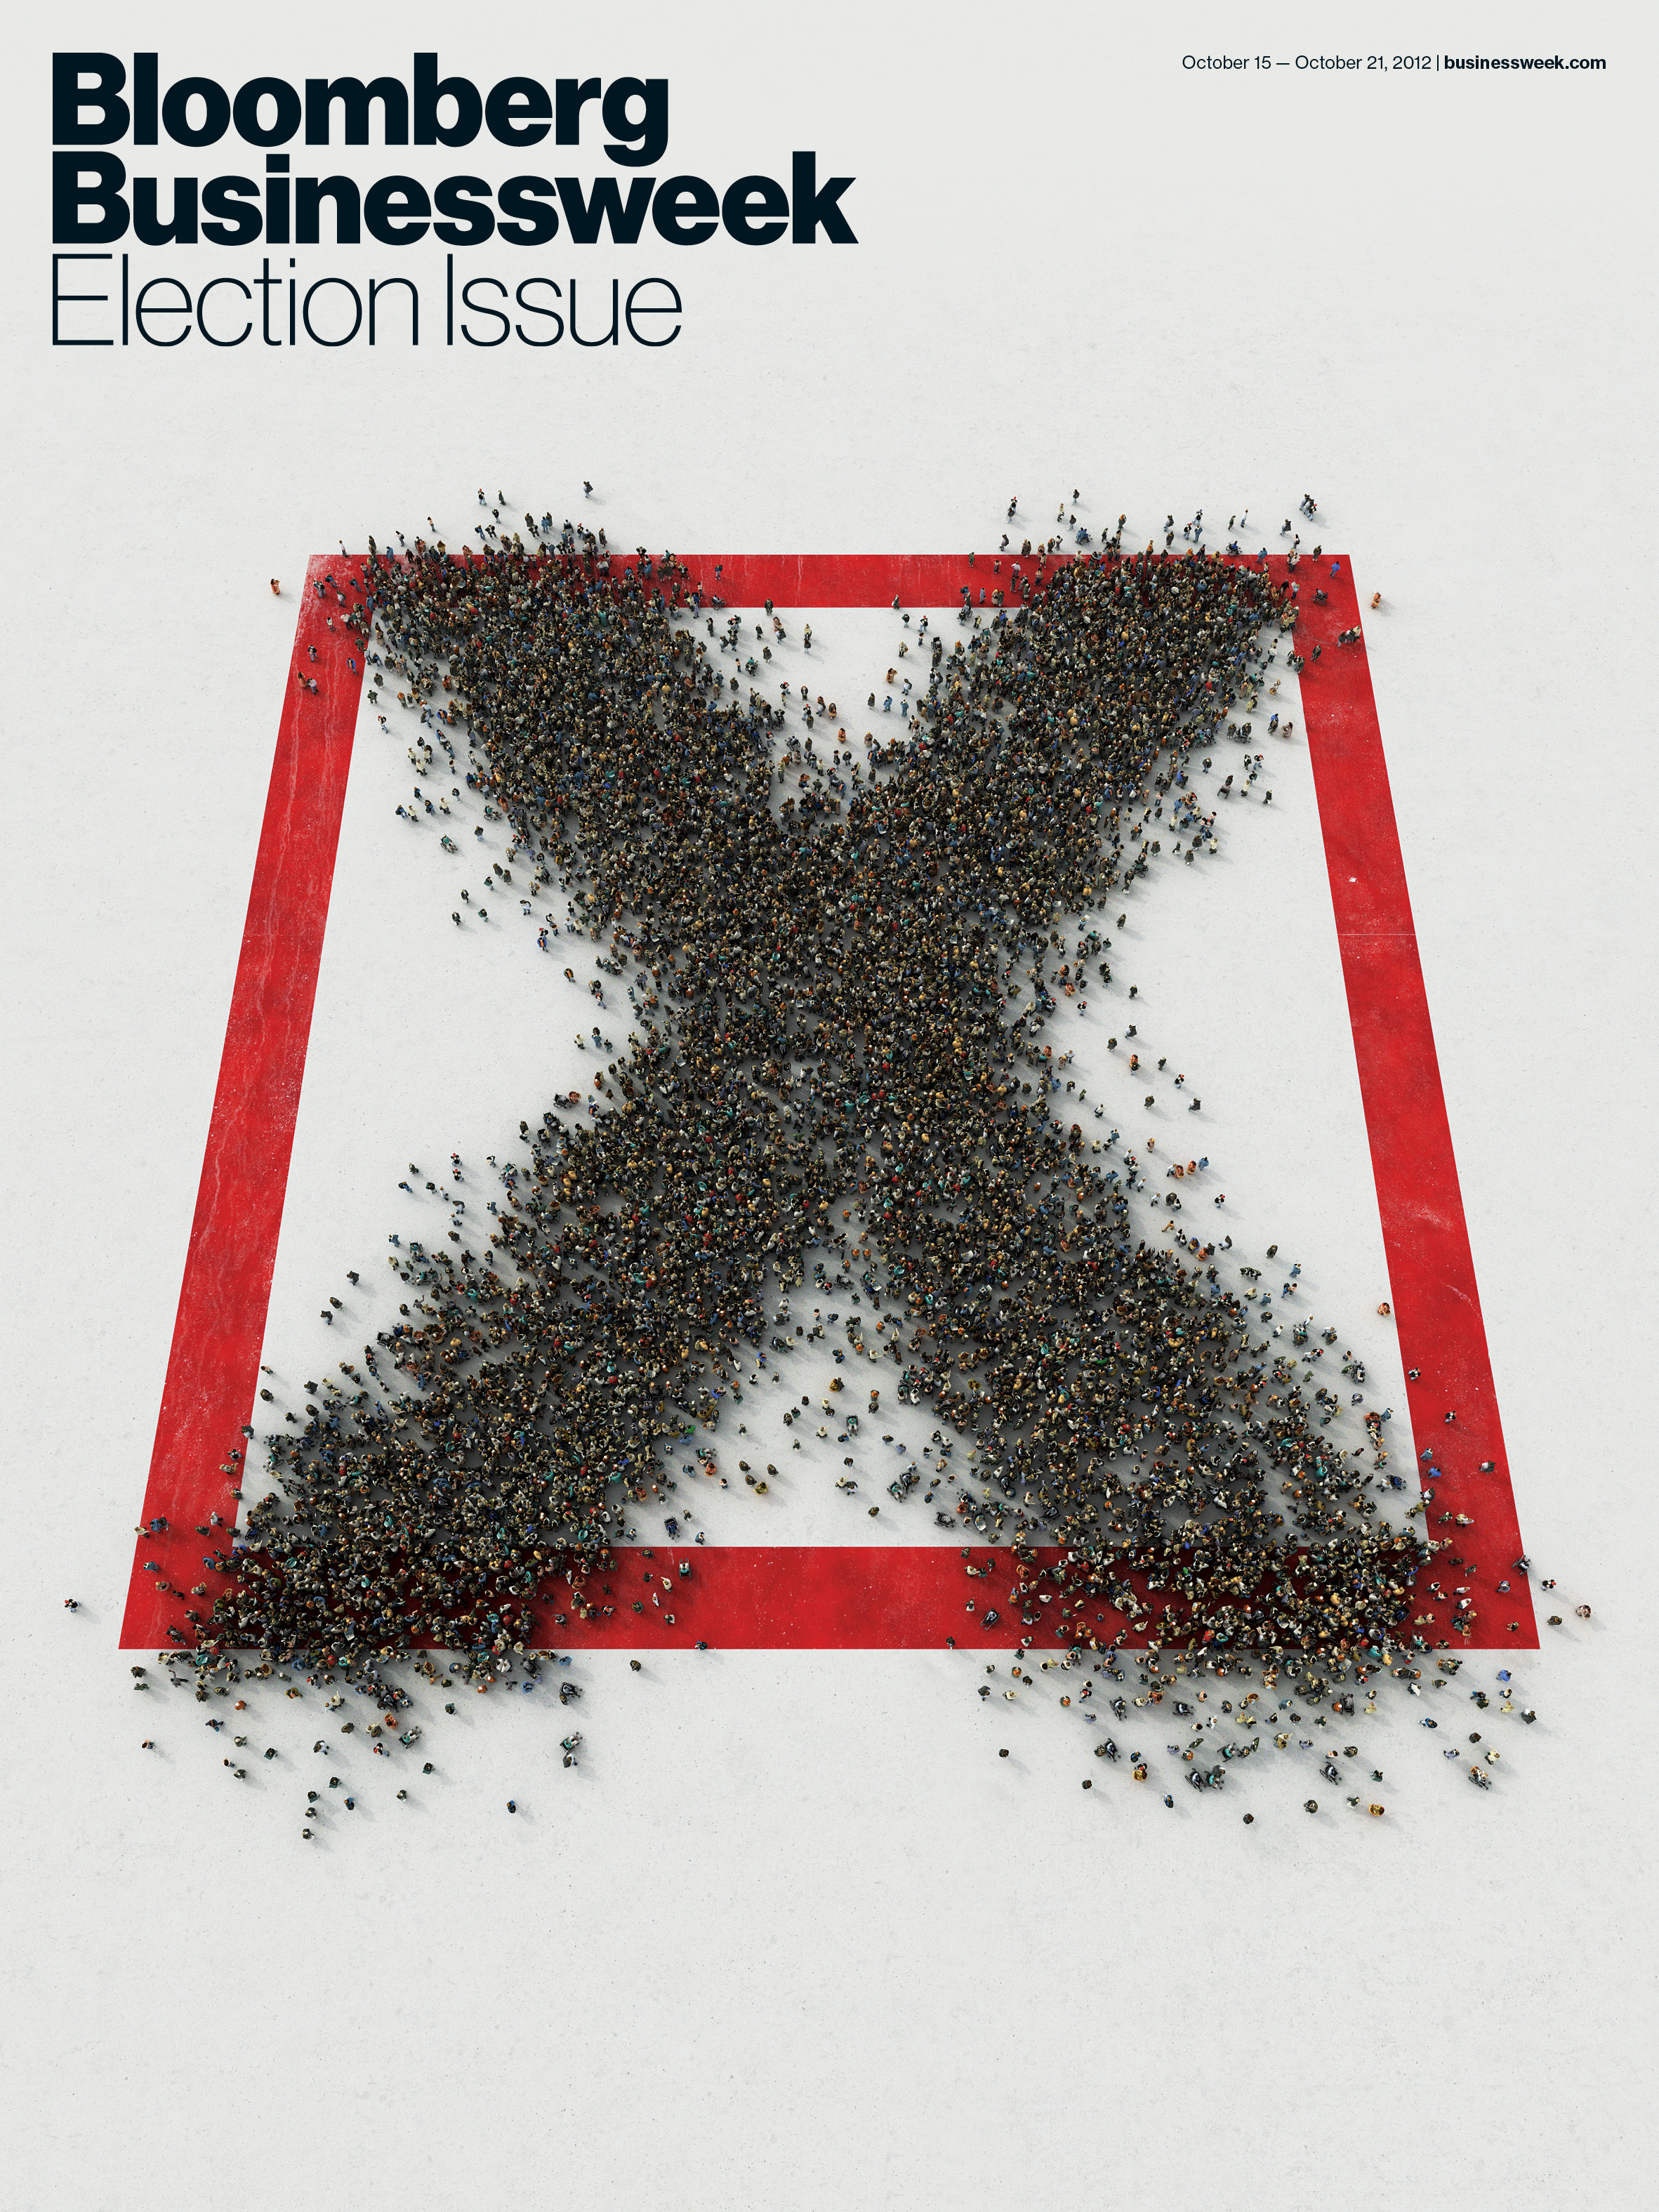 Bloomberg Businessweek-October 15-21, 2012: "Election Issue"